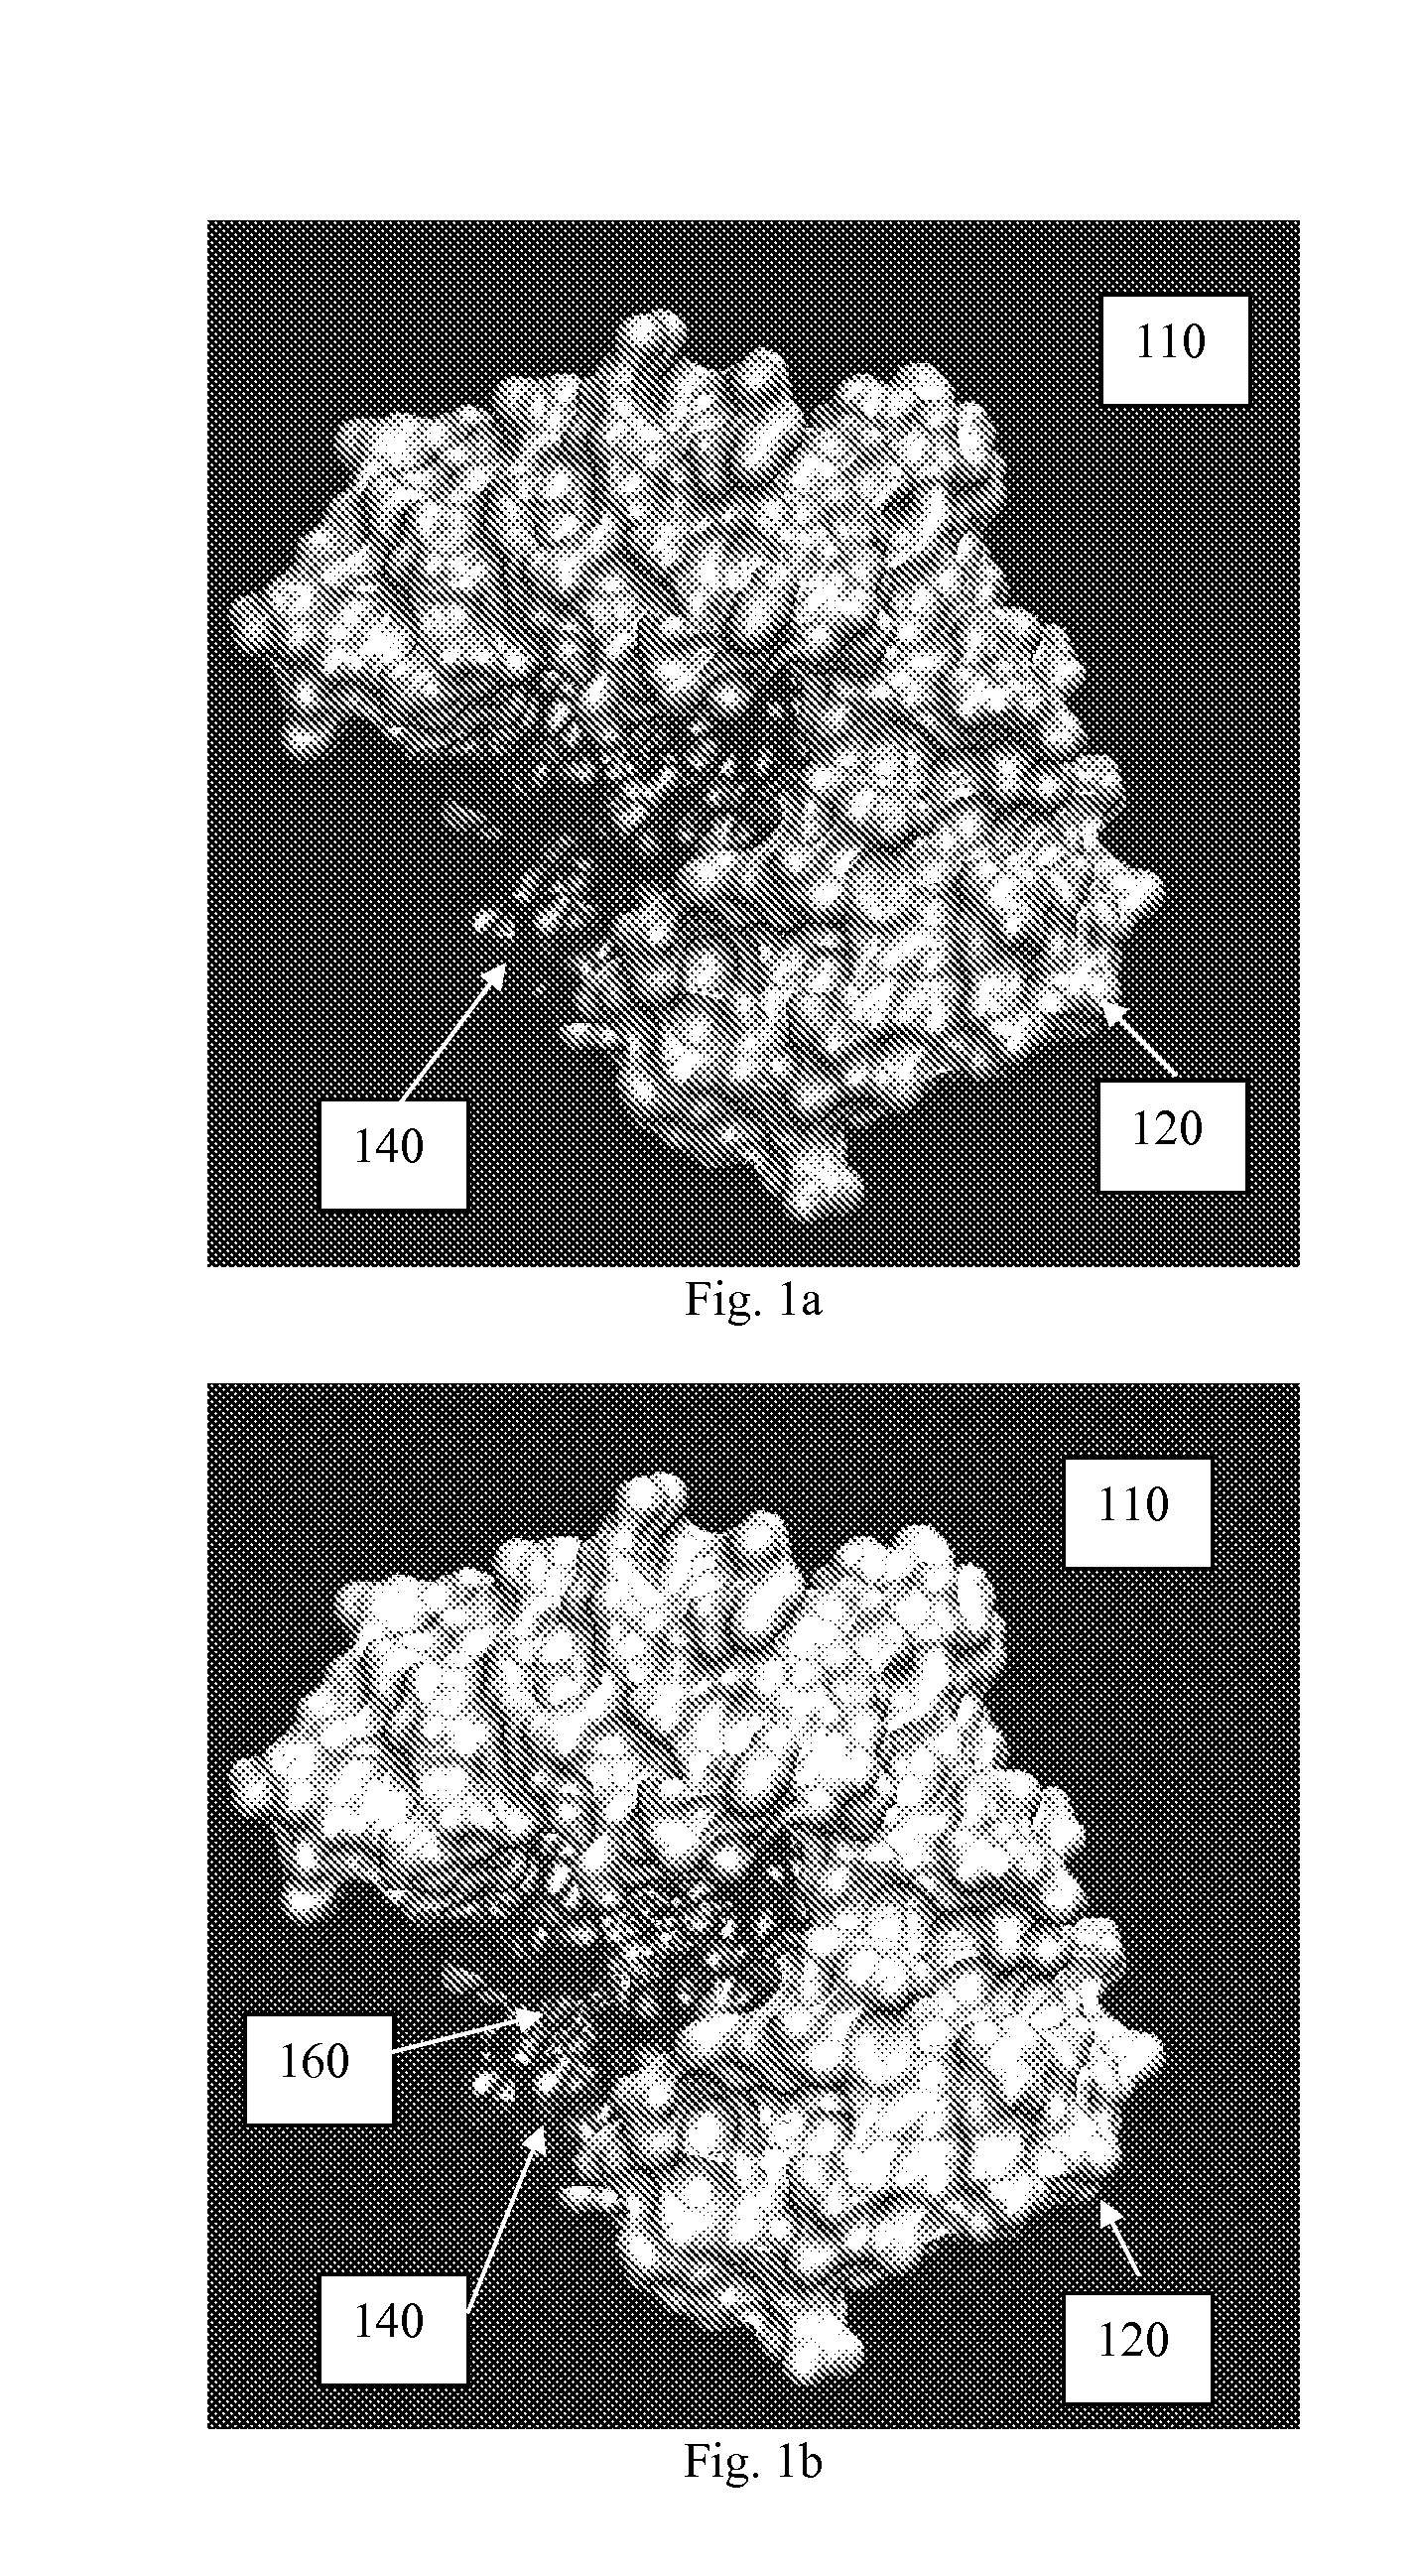 Method for Estimation of Location of Active Sites of Biopolymers Based on Virtual Library Screening